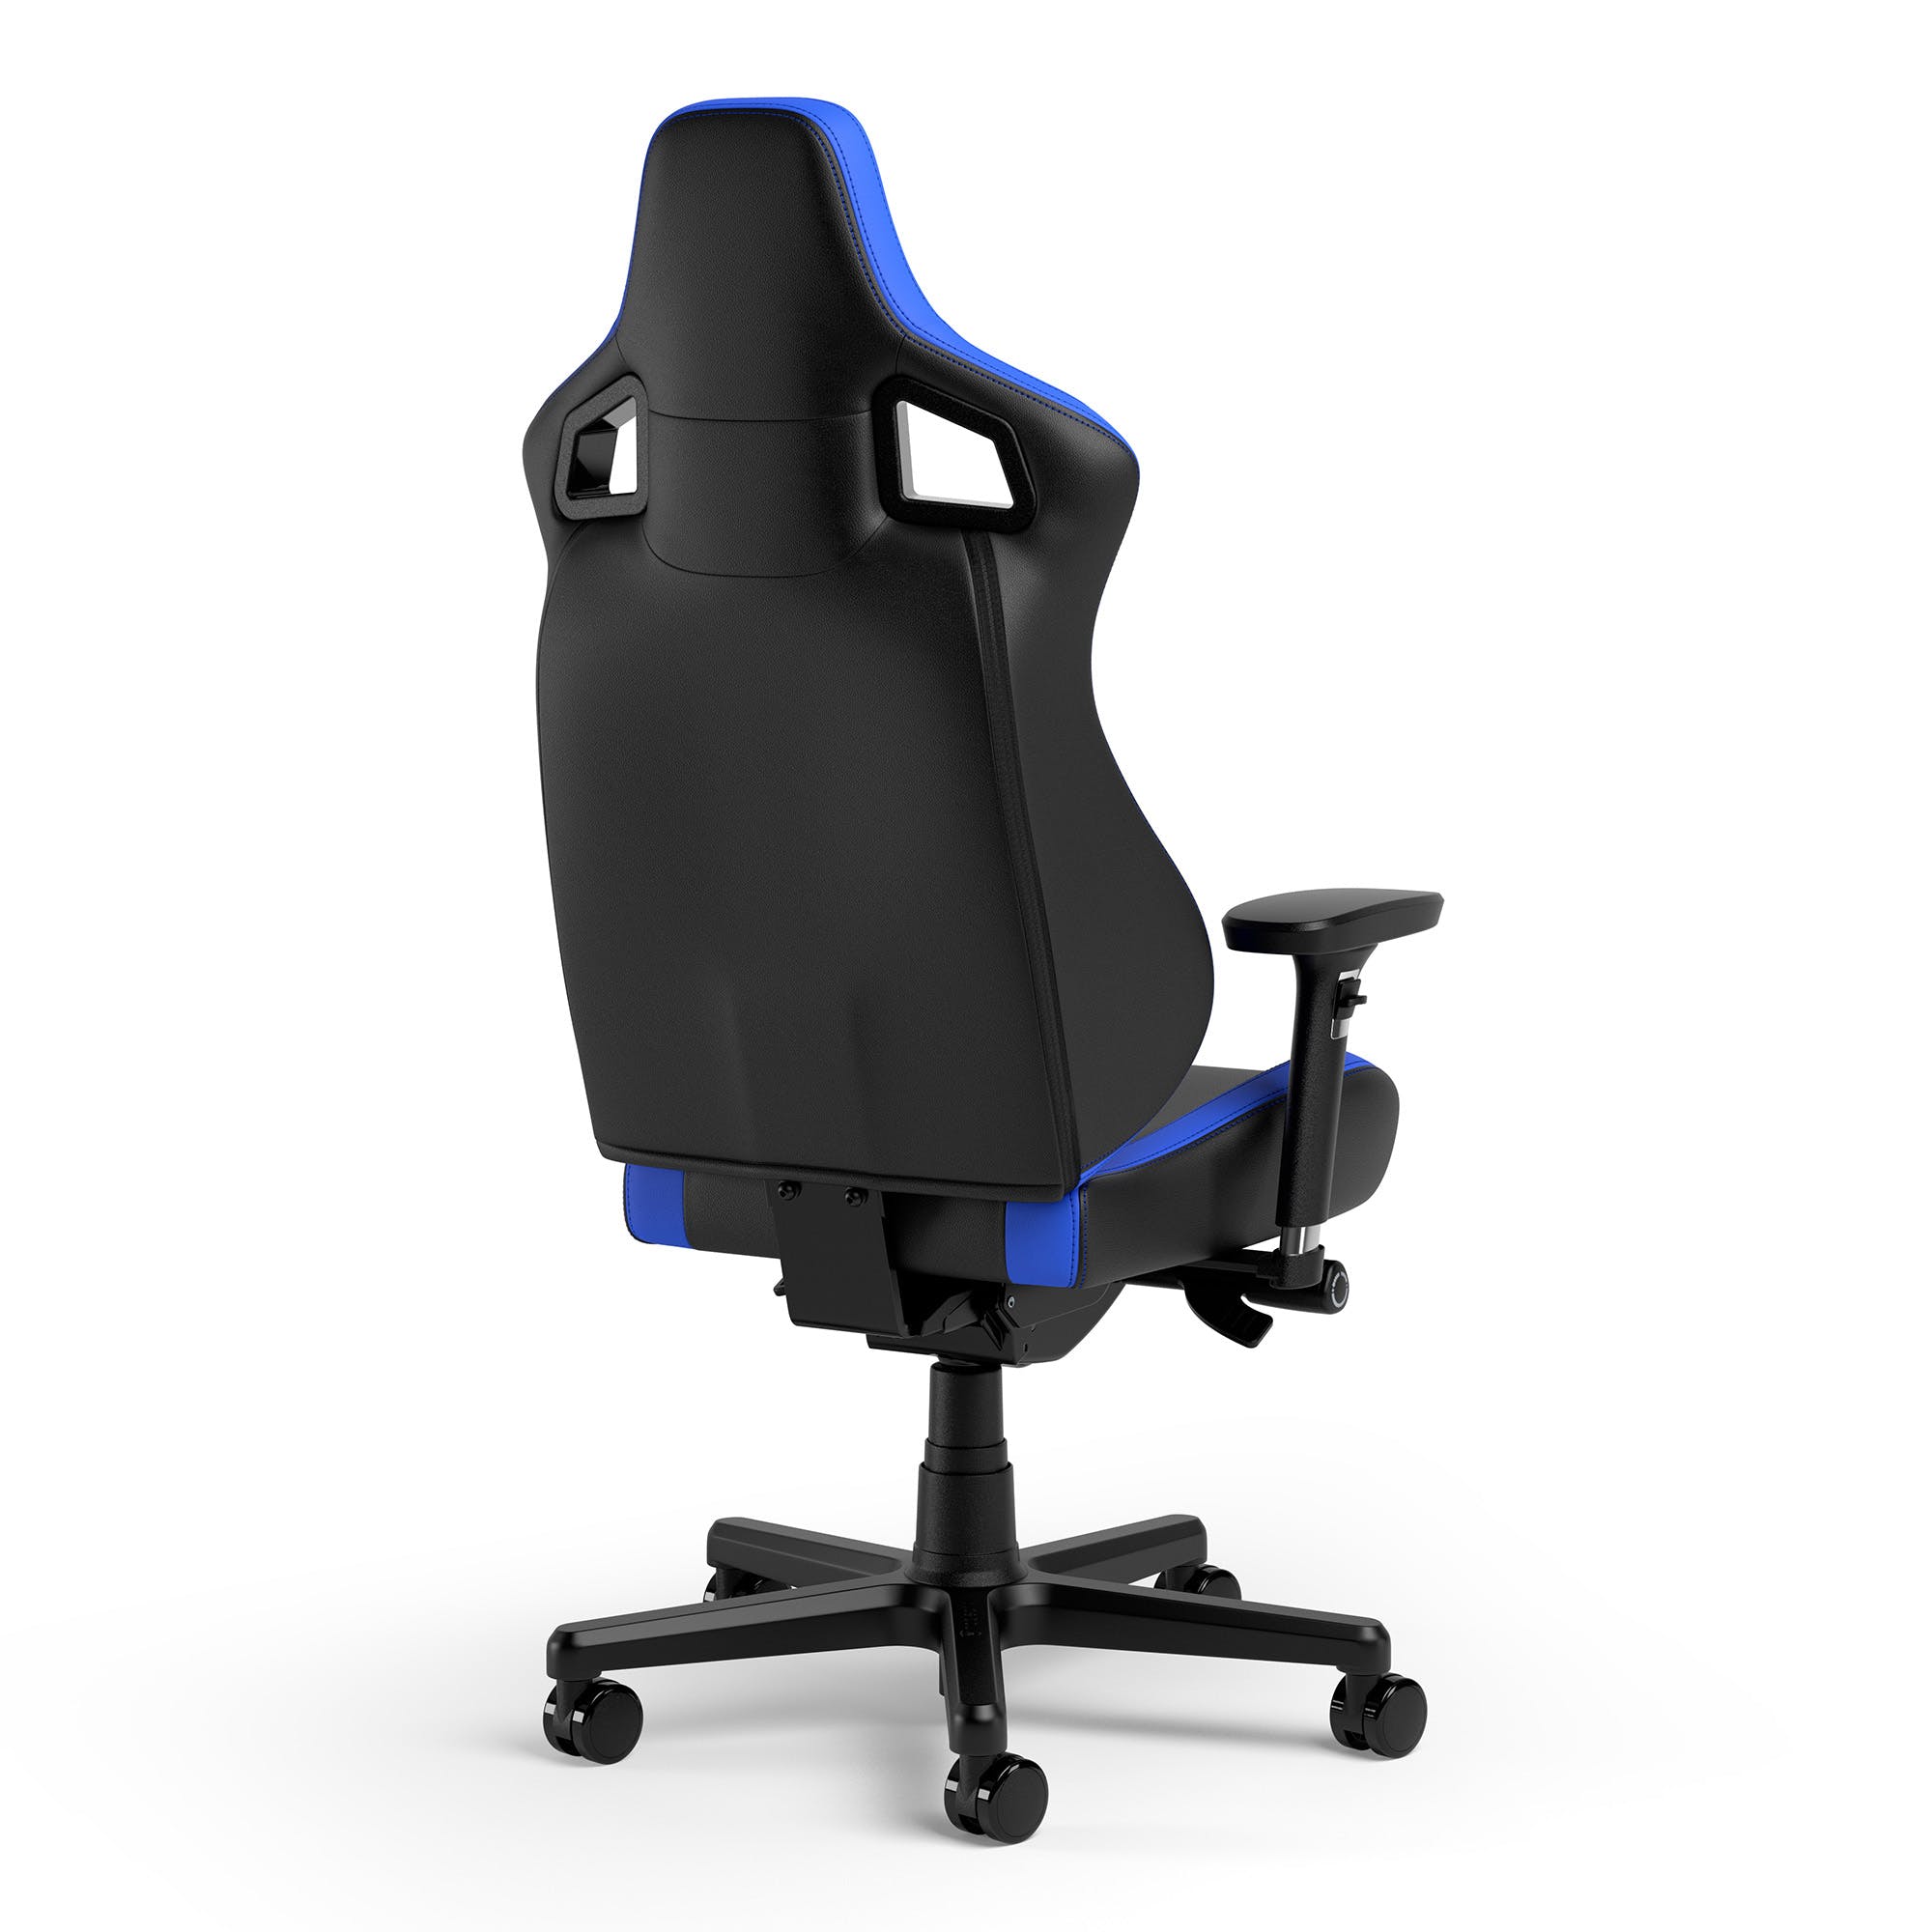 noblechairs - noblechairs EPIC Compact Gaming Chair - Carbon/Black/Blue